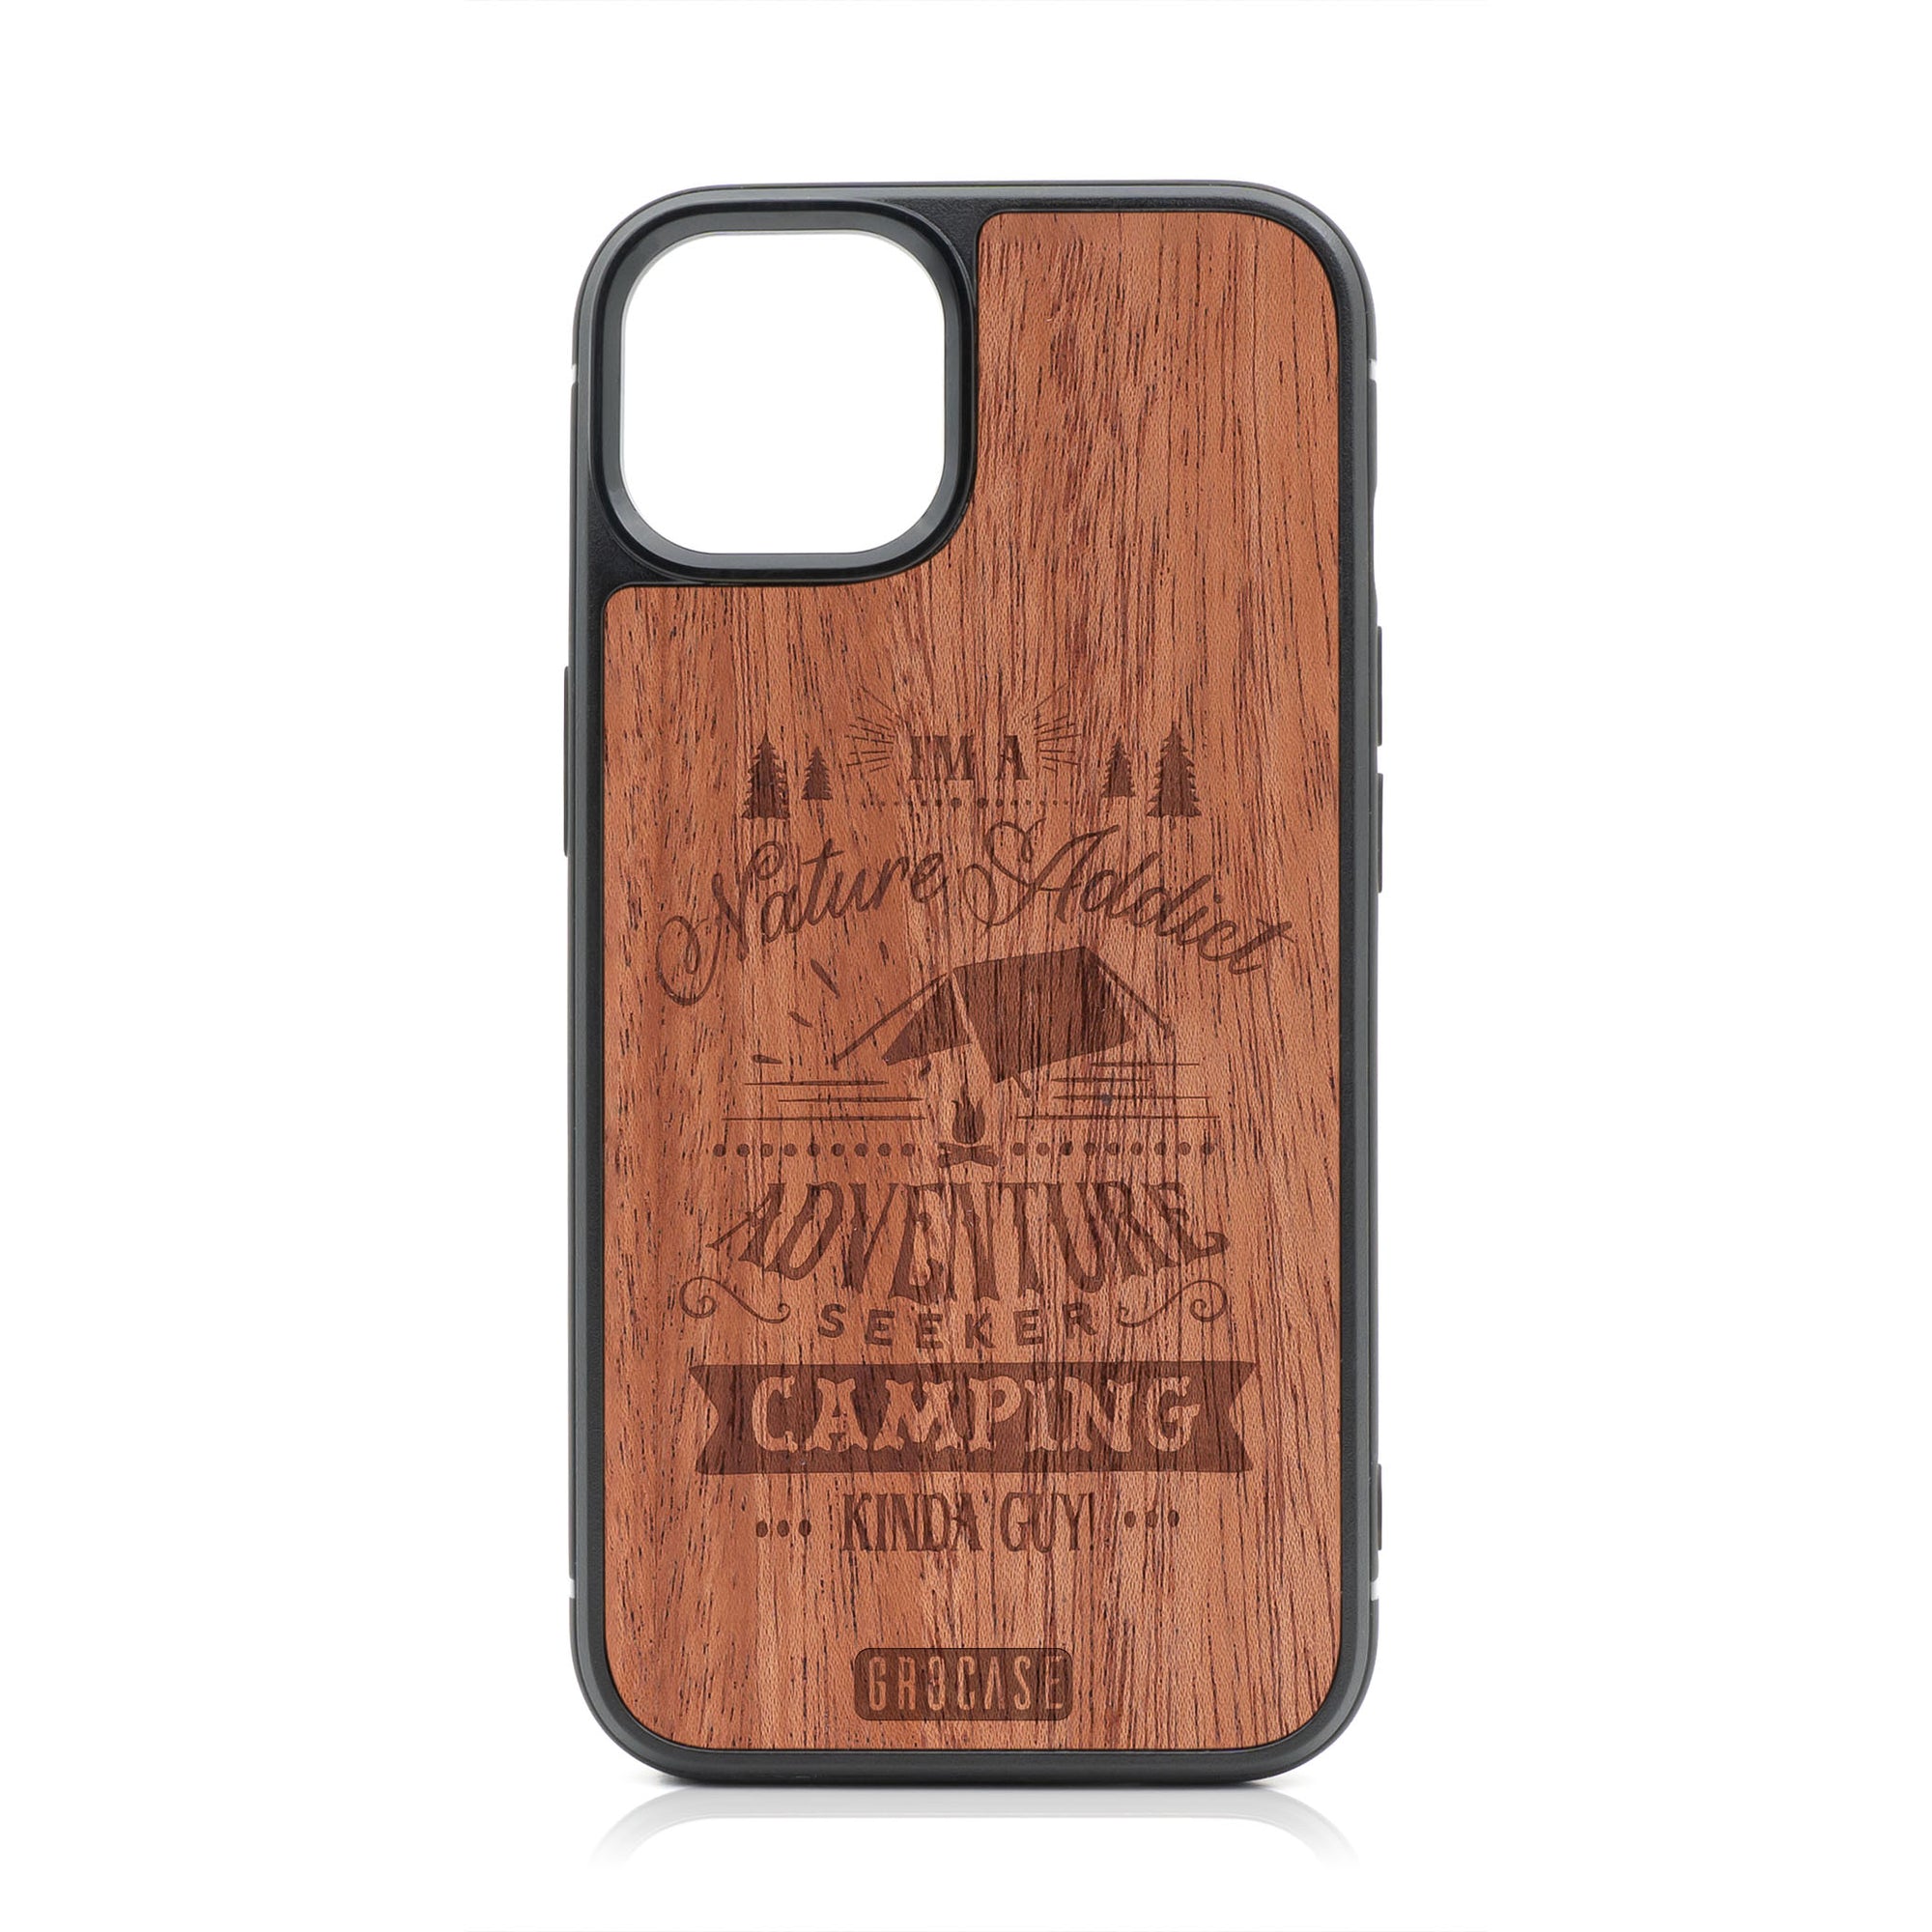 I'm A Nature Addict Adventure Seeker Camping Kinda Guy Design Wood Case For iPhone 13